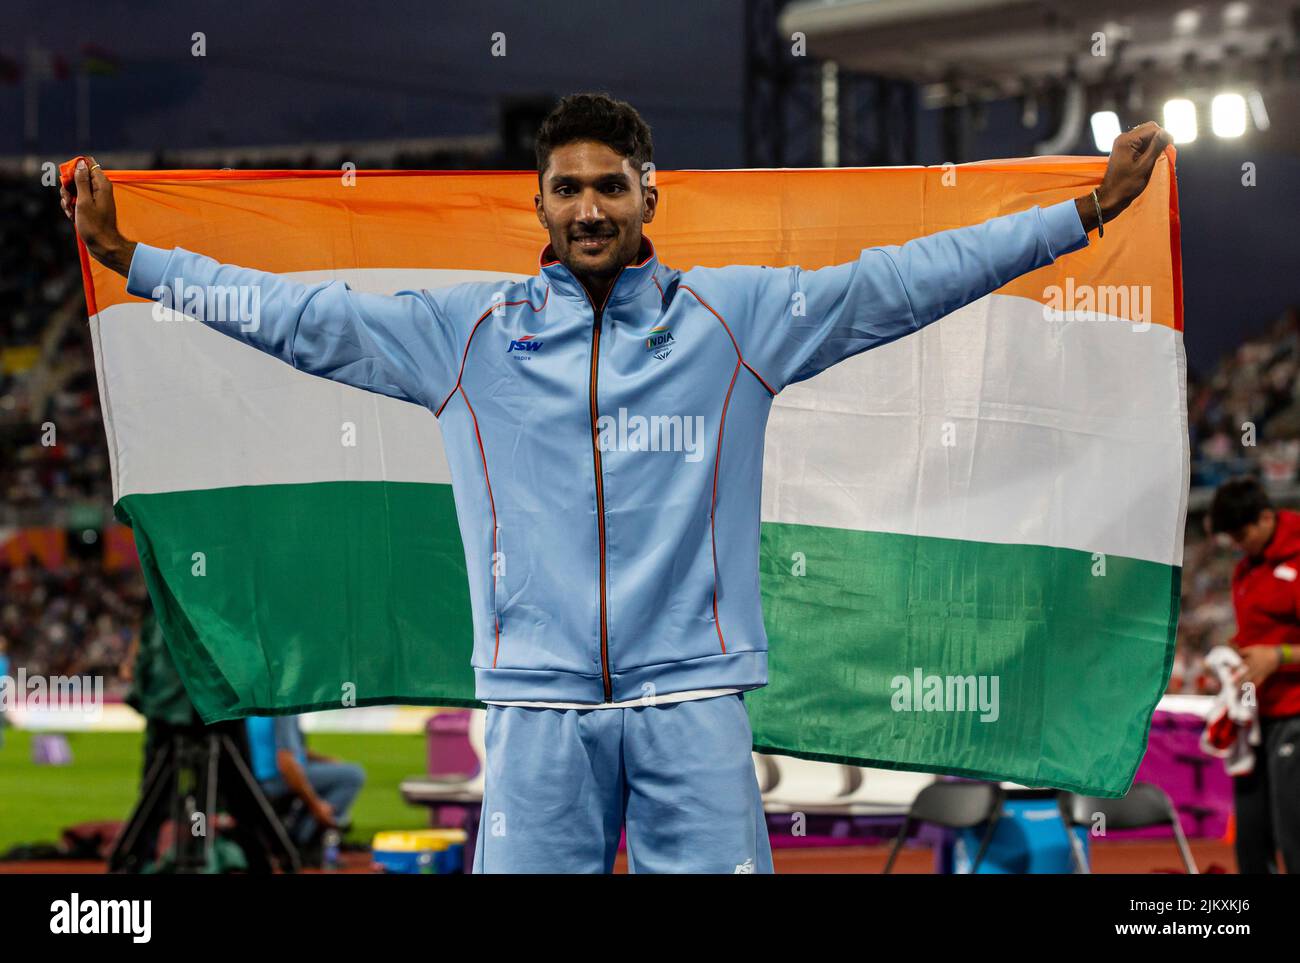 3rd August 2022; Alexander Stadium, Birmingham, Midlands, England: Day 6 of the 2022 Commonwealth Games: Tejaswin Shankar (IND) with his national flag after winning the Bronze medal in the Men's High Jump Final with a height of 2.22m Stock Photo